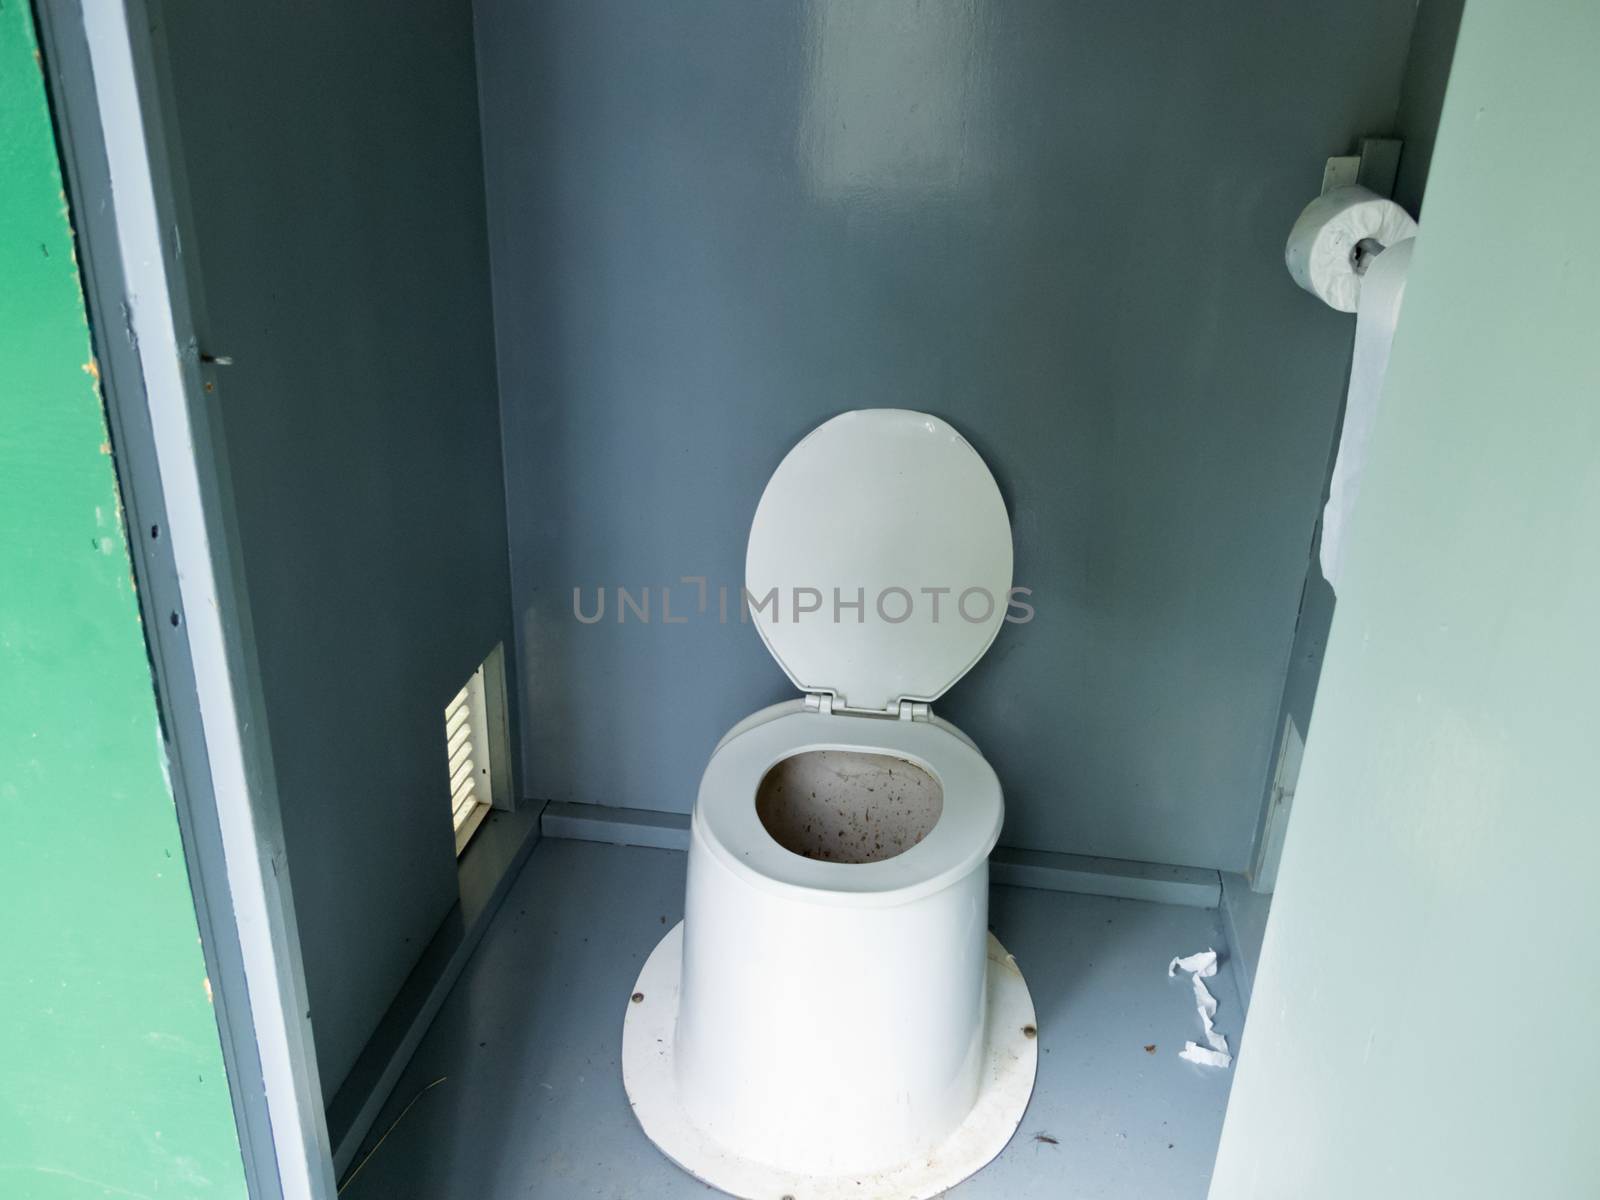 Filthy camp ground outhouse latrine inside toilet by PiLens